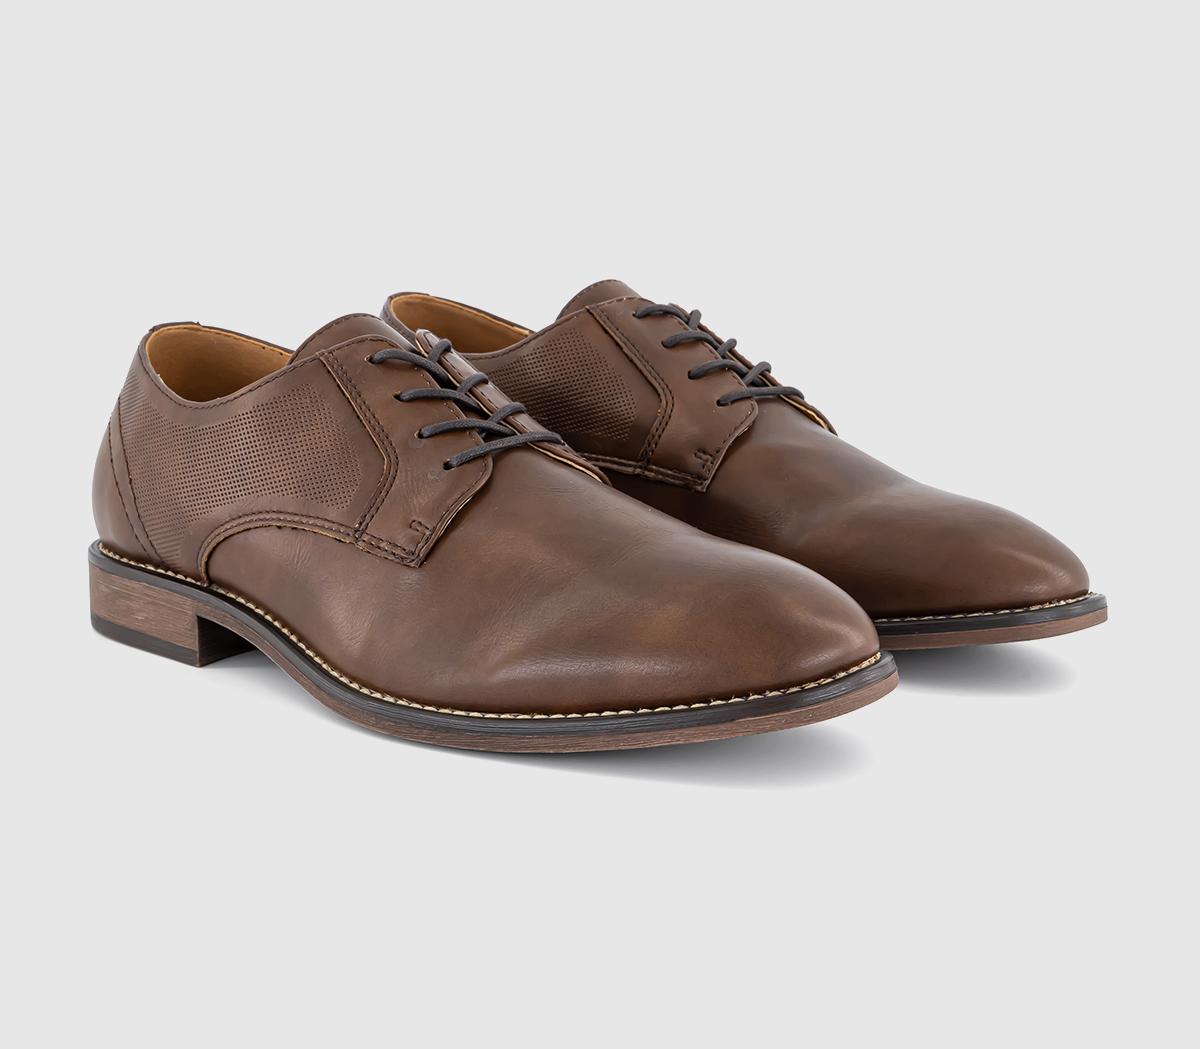 OFFICE Mens Claydon Smart Derby Shoes Brown, 7